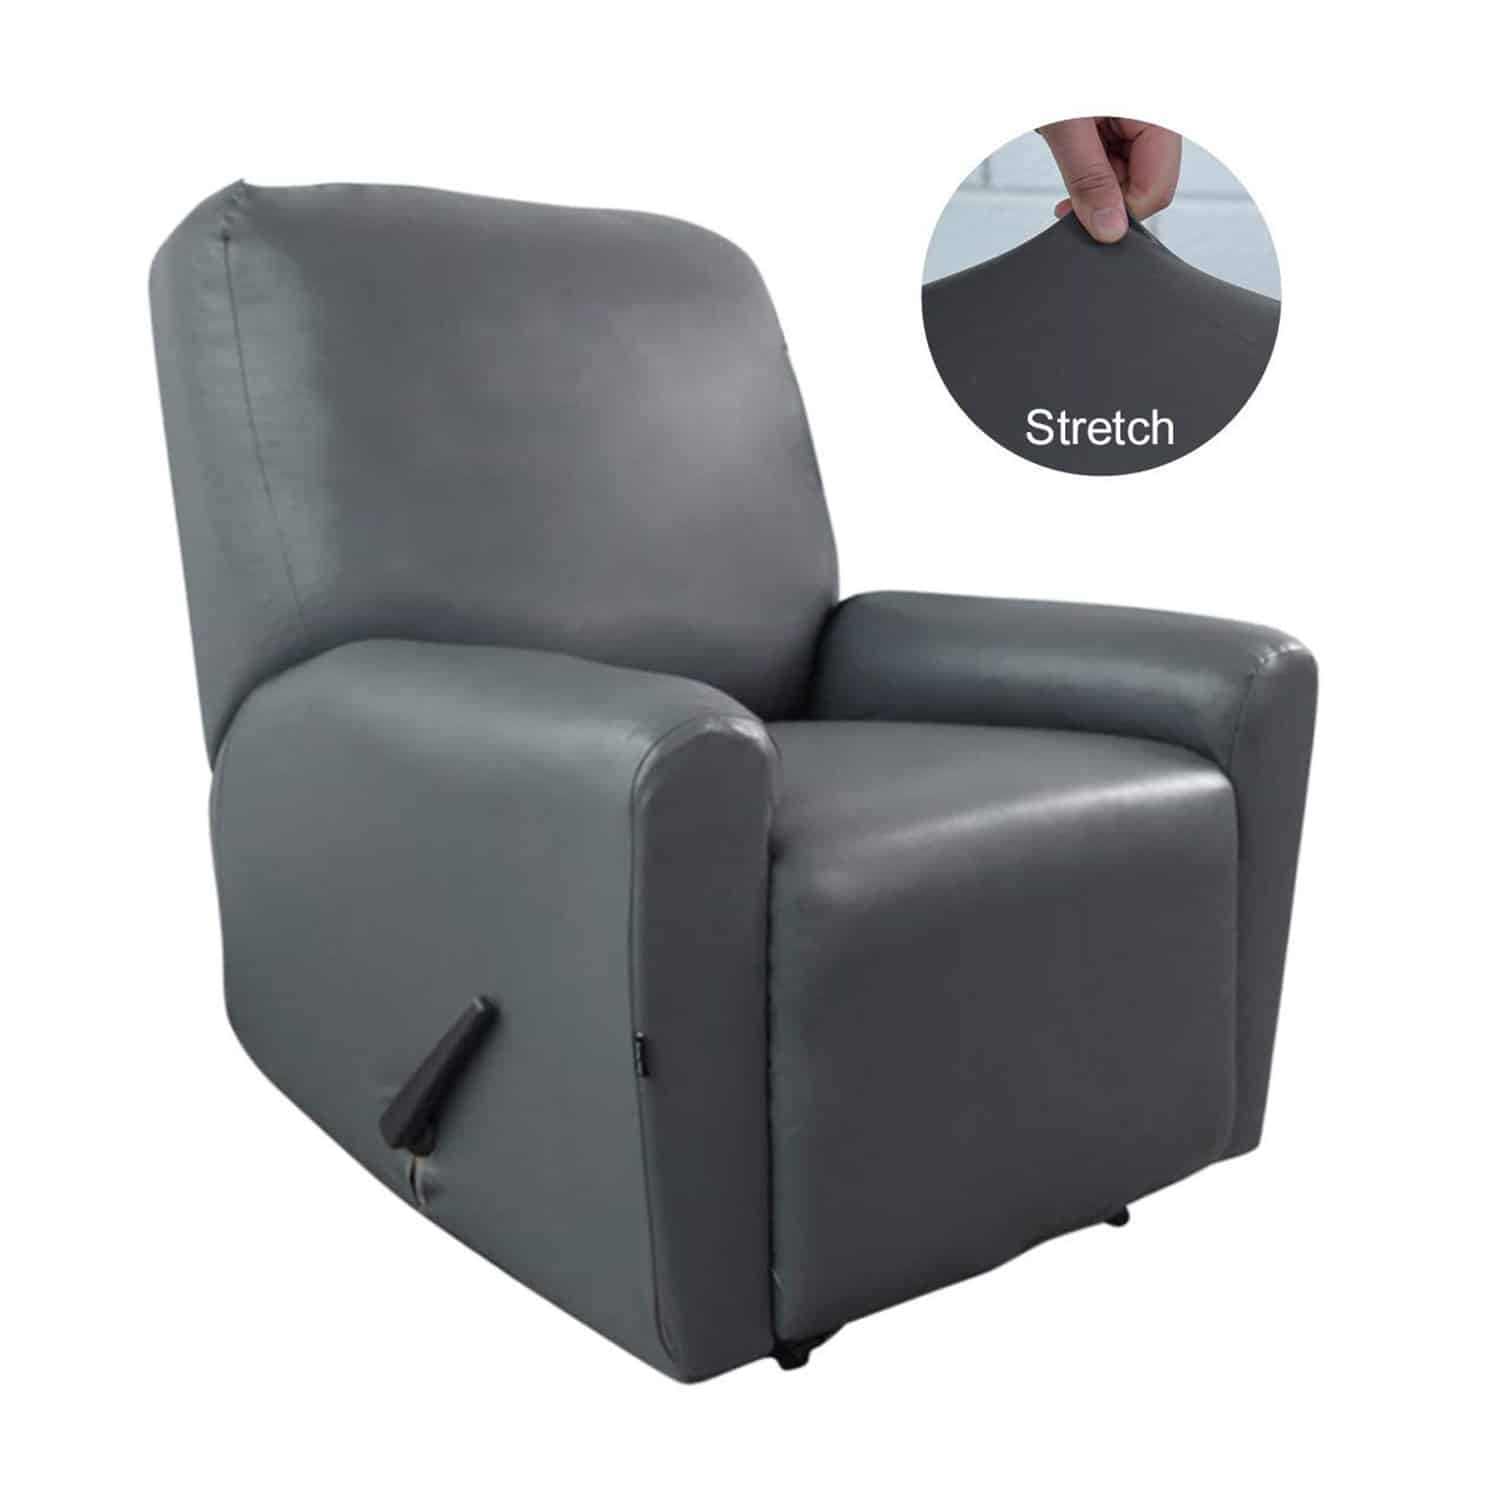 Top 10 Best Recliner Chair Covers in 2022 | Slipcover - Reviews